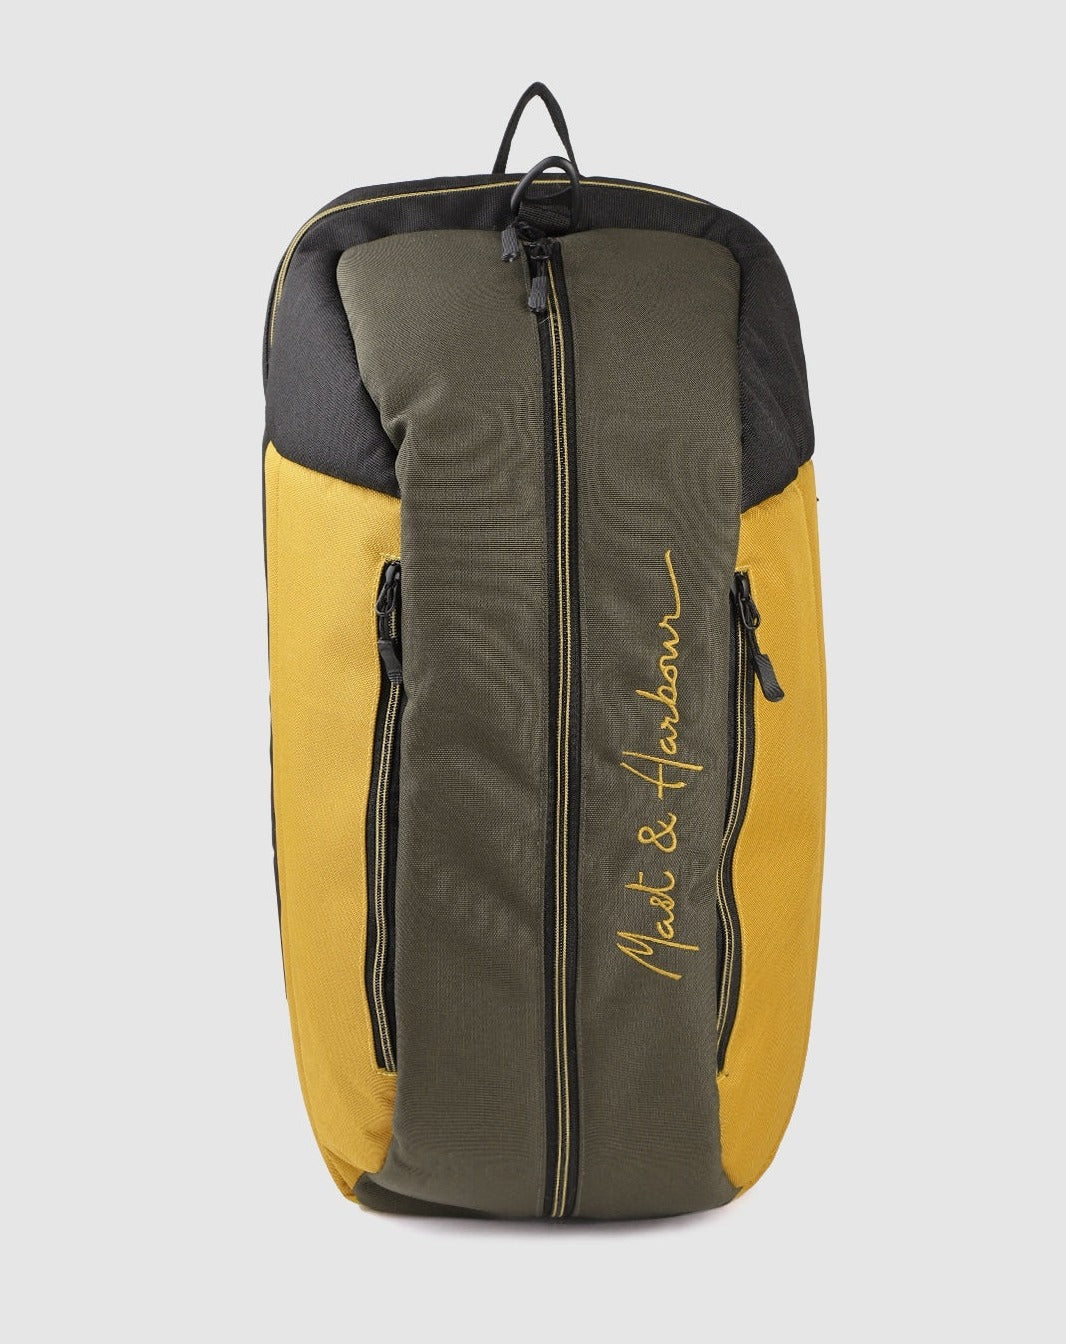 Mast & Harbour Duffle + Backpack